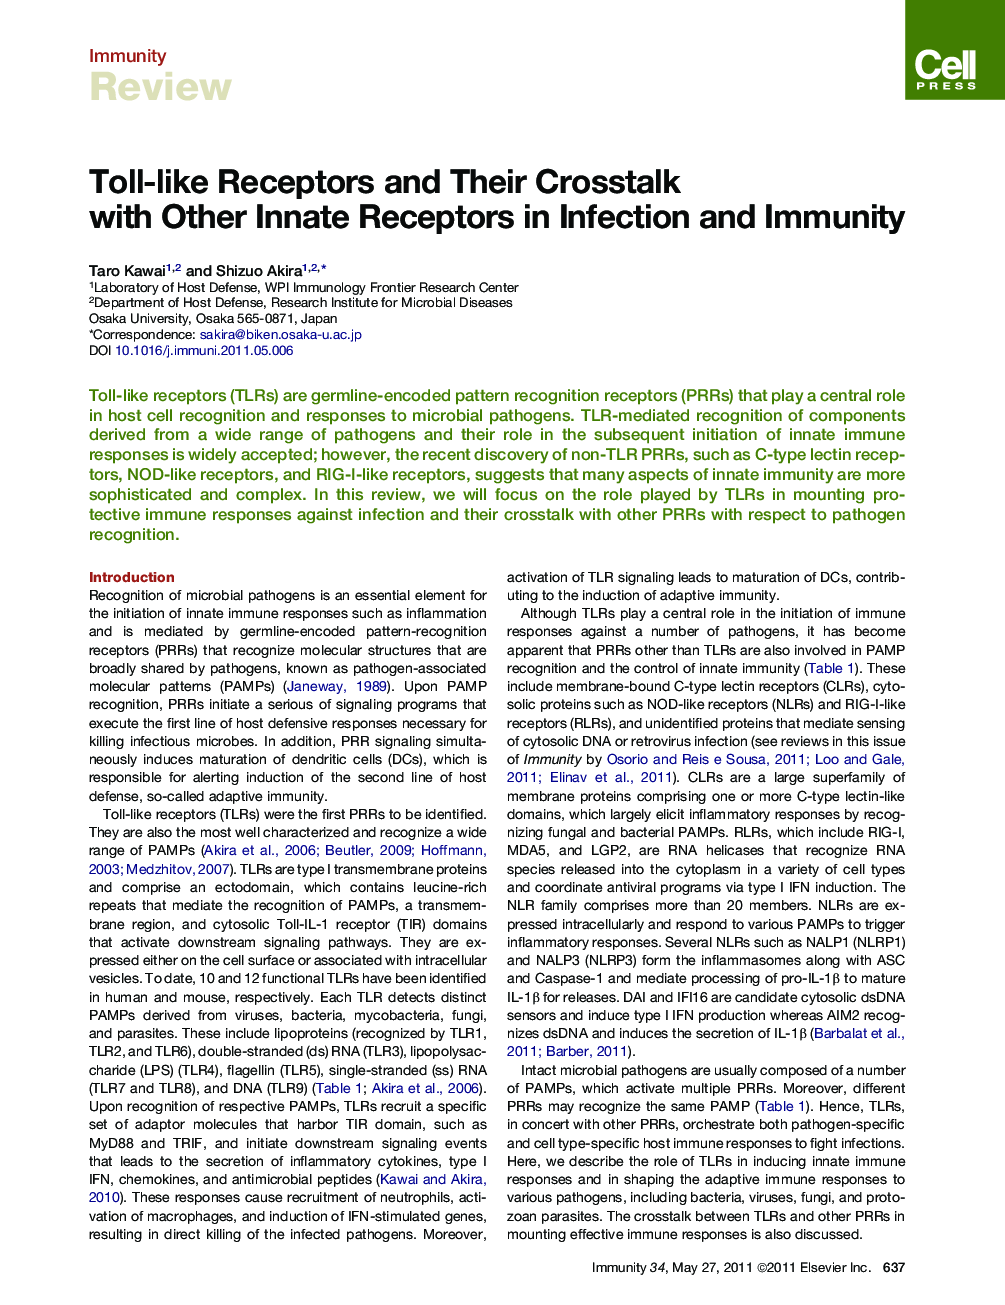 Toll-like Receptors and Their Crosstalk with Other Innate Receptors in Infection and Immunity